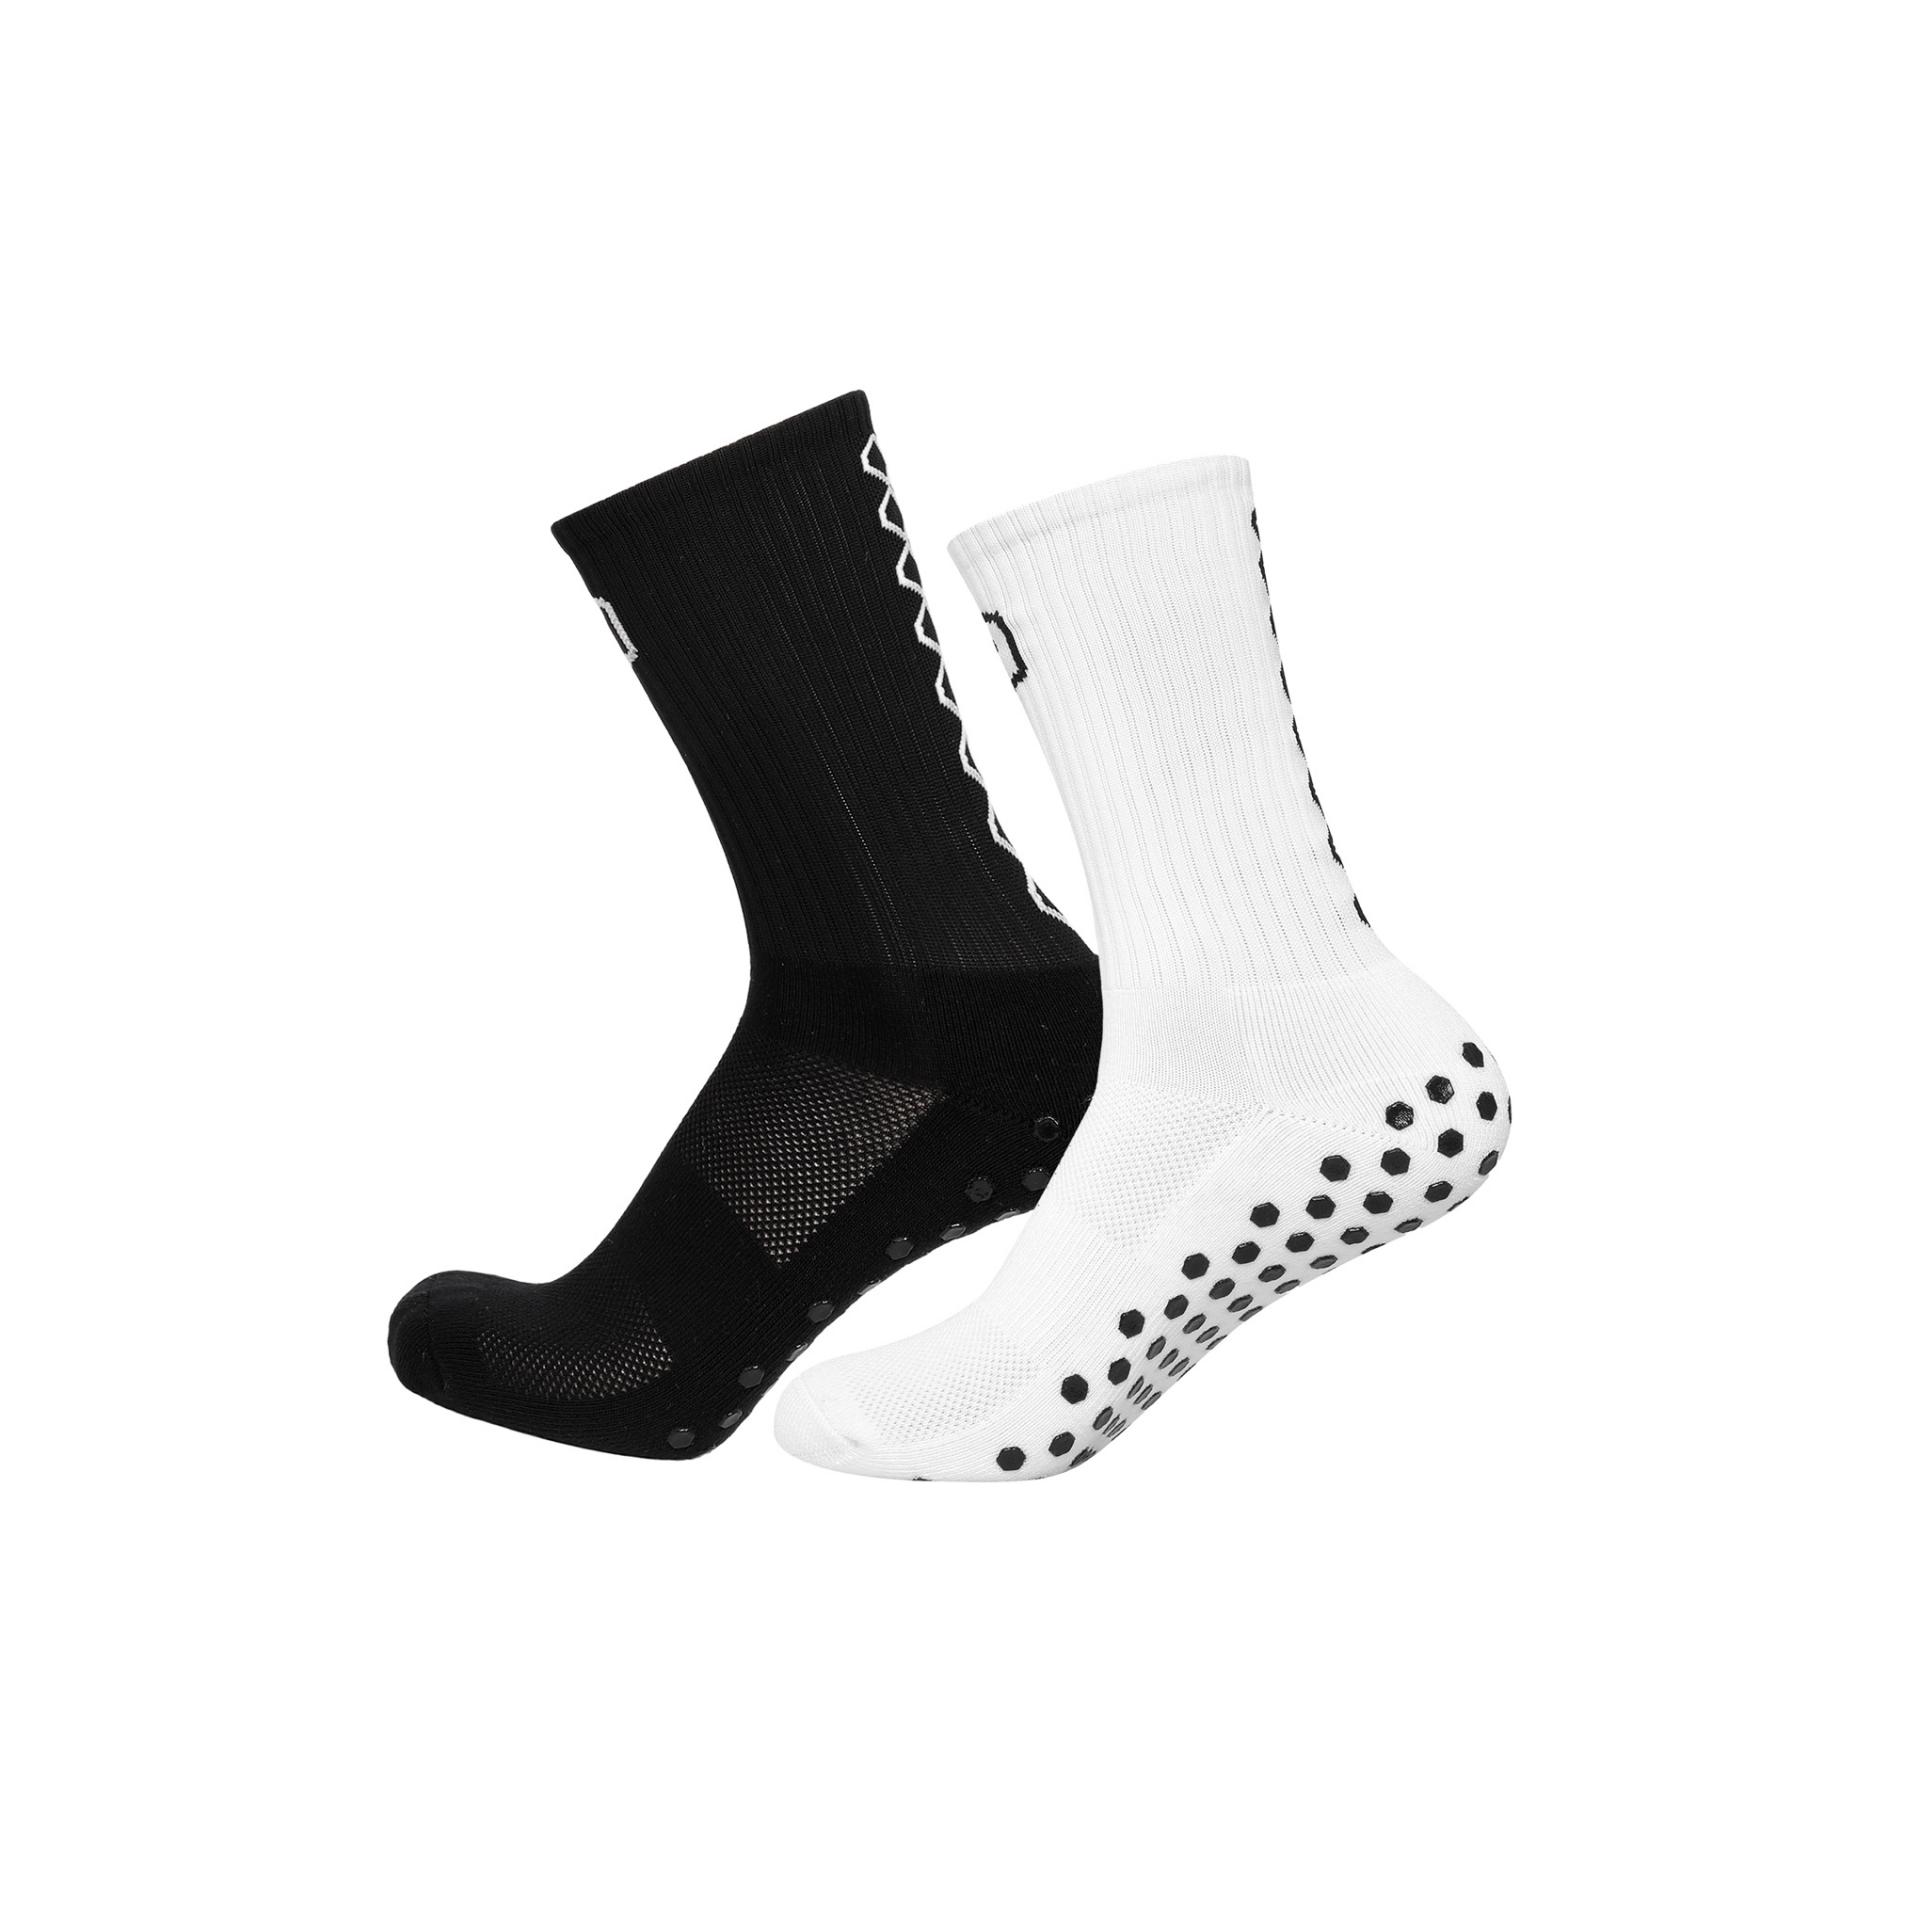 Comprar Pack 2 Pares Calcetines Antideslizantes en Influence Quality